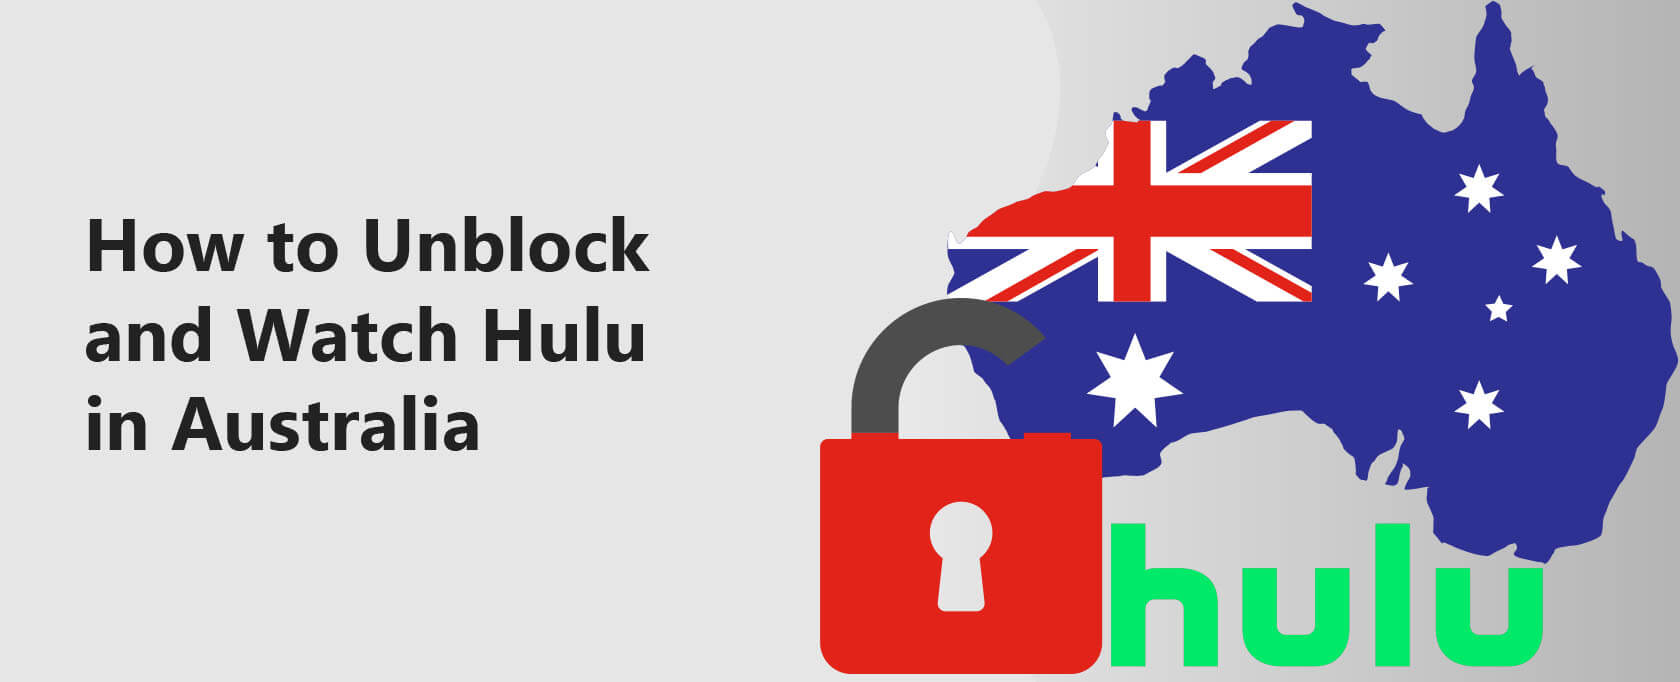 How to Unblock and Watch Hulu in Australia